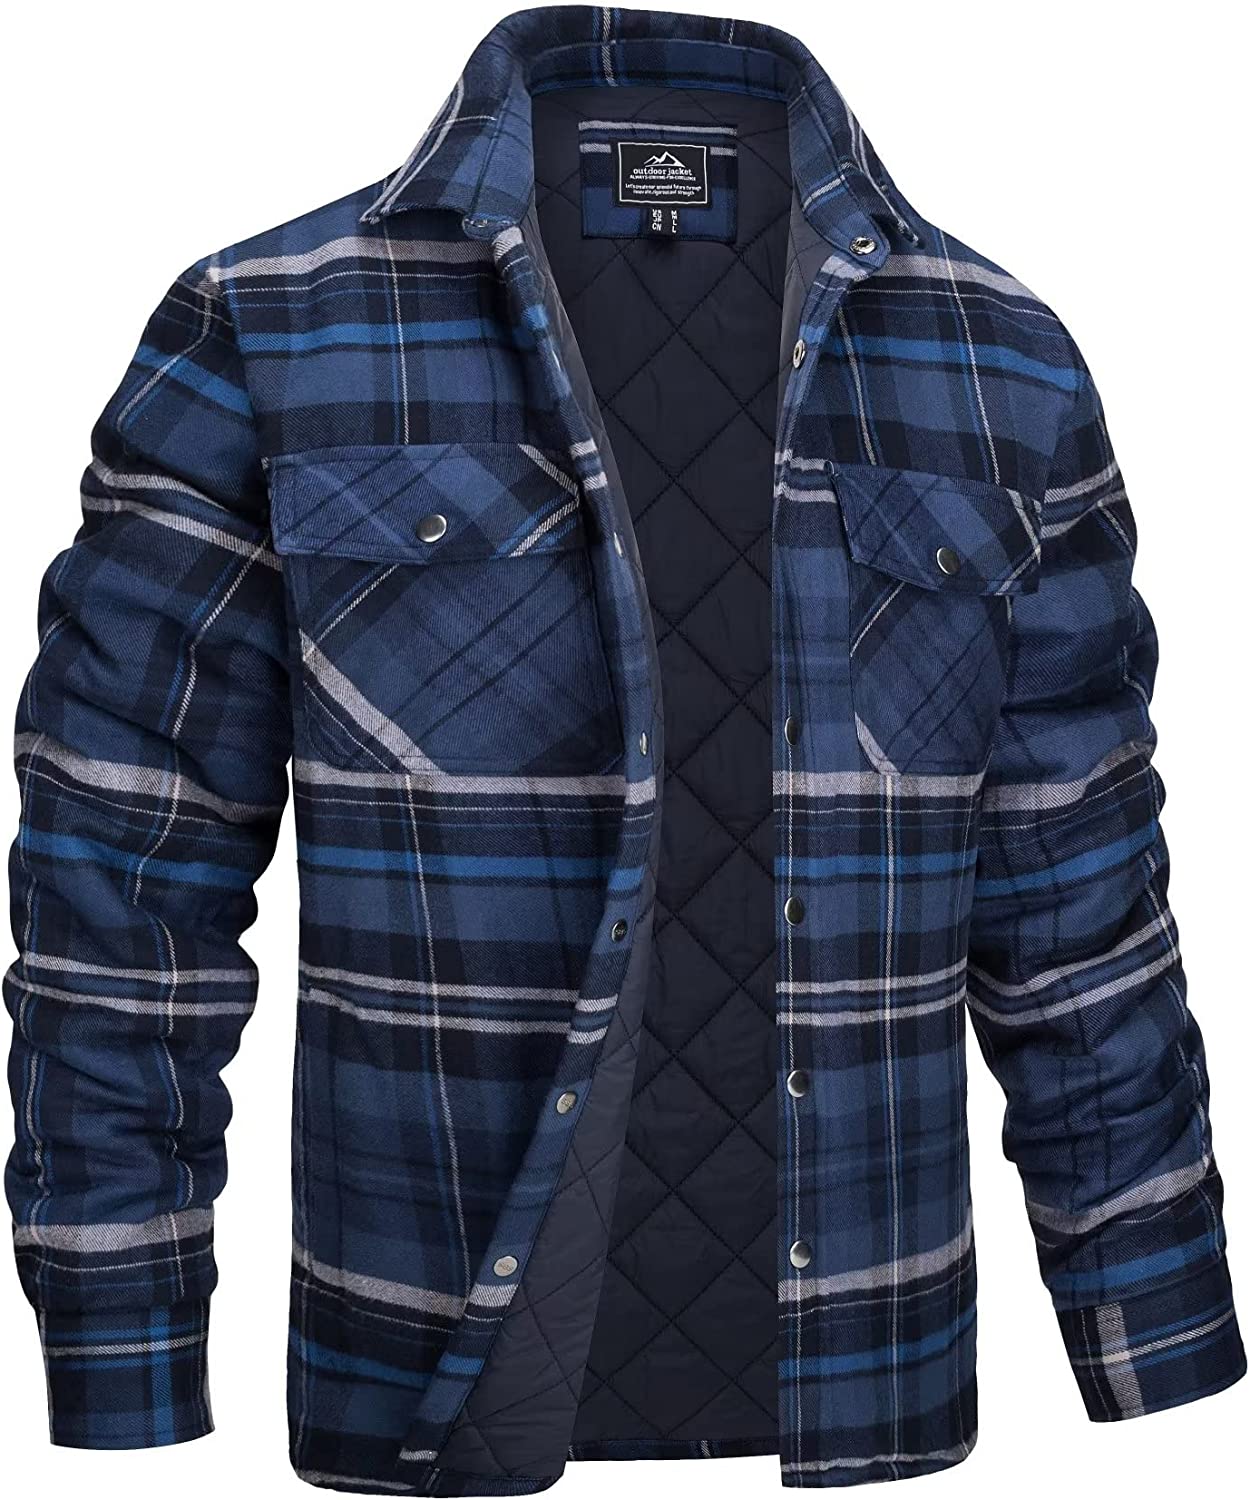 Men's Flannel Shirt Jacket  Long Sleeve Quilted Lined Plaid Coat